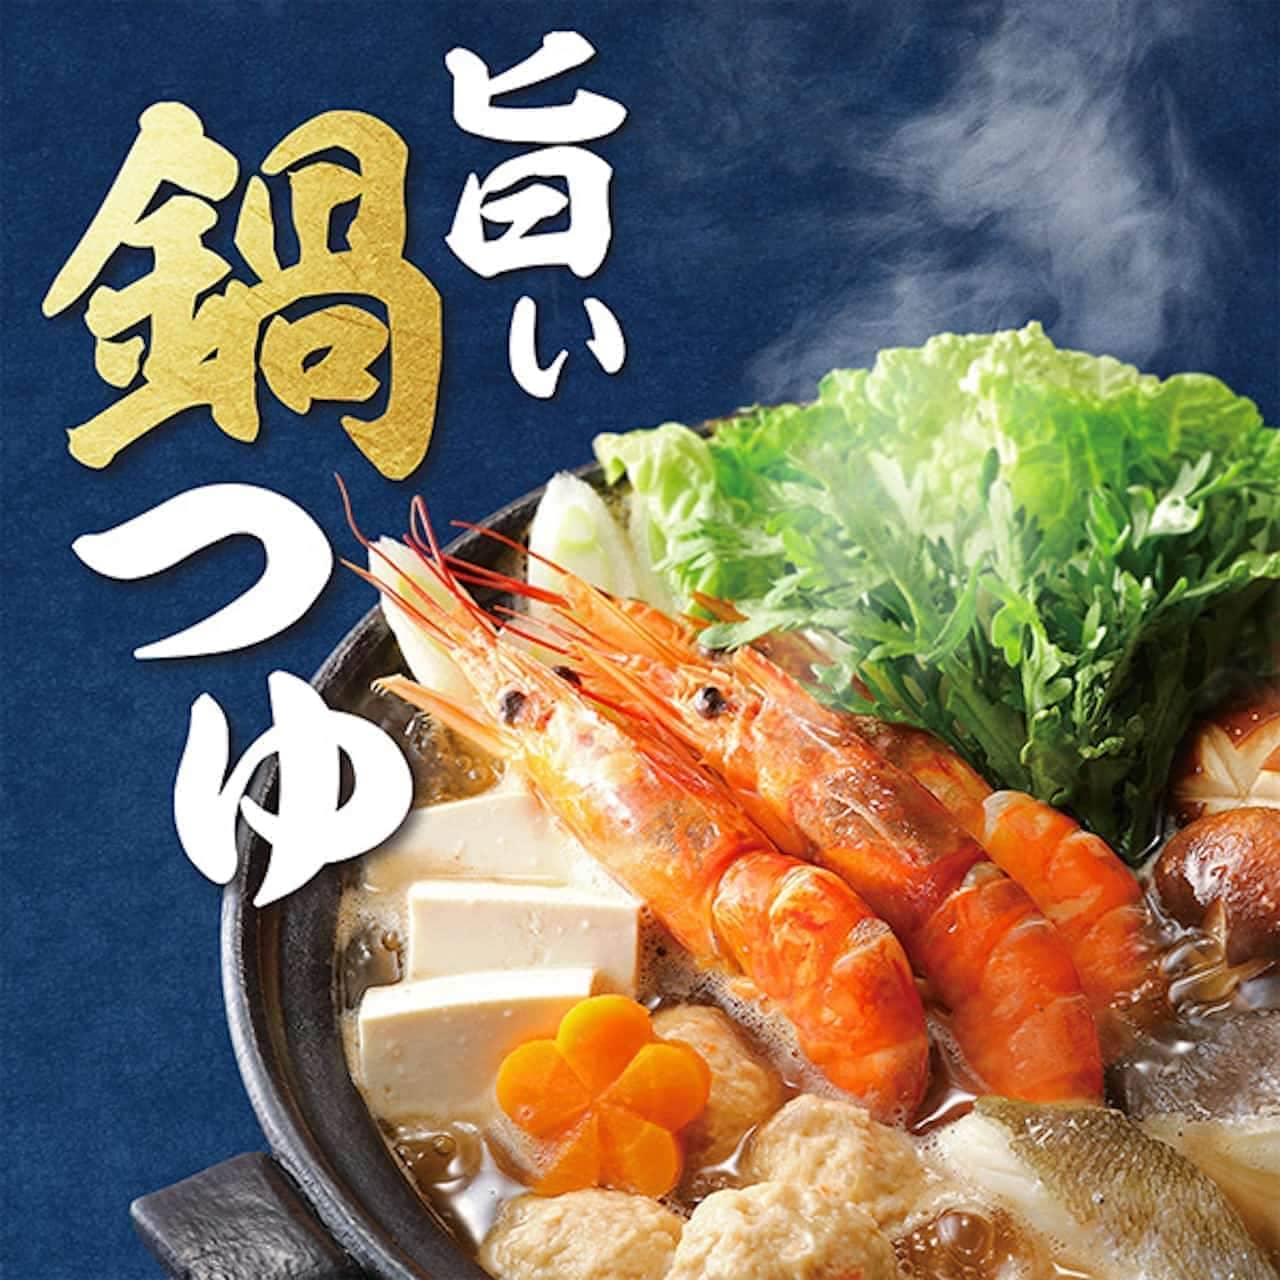 KALDI: 4 popular & officially recommended "nabe tsuyu" products